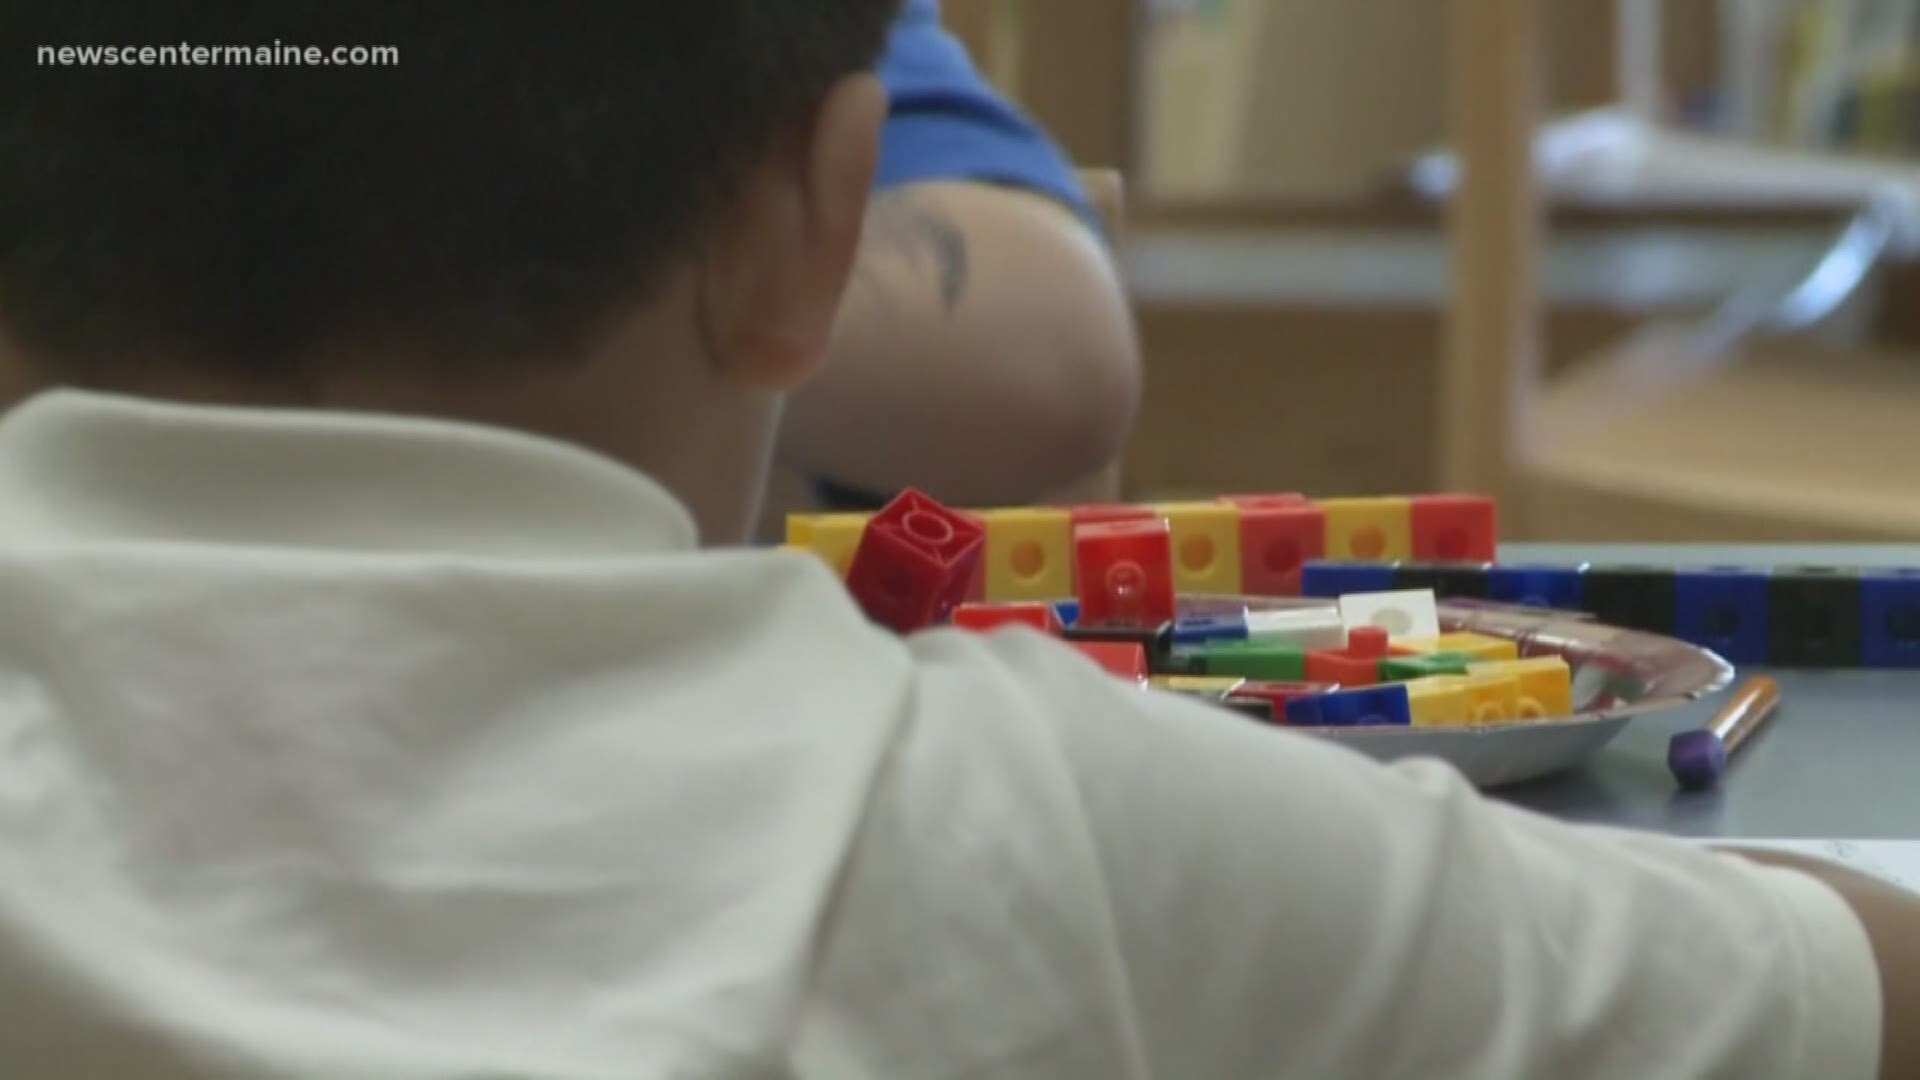 A new commission in Maine, scheduled to start work new month, is looking to shorten the wait list for kids in need of mental and behavioral health care services.